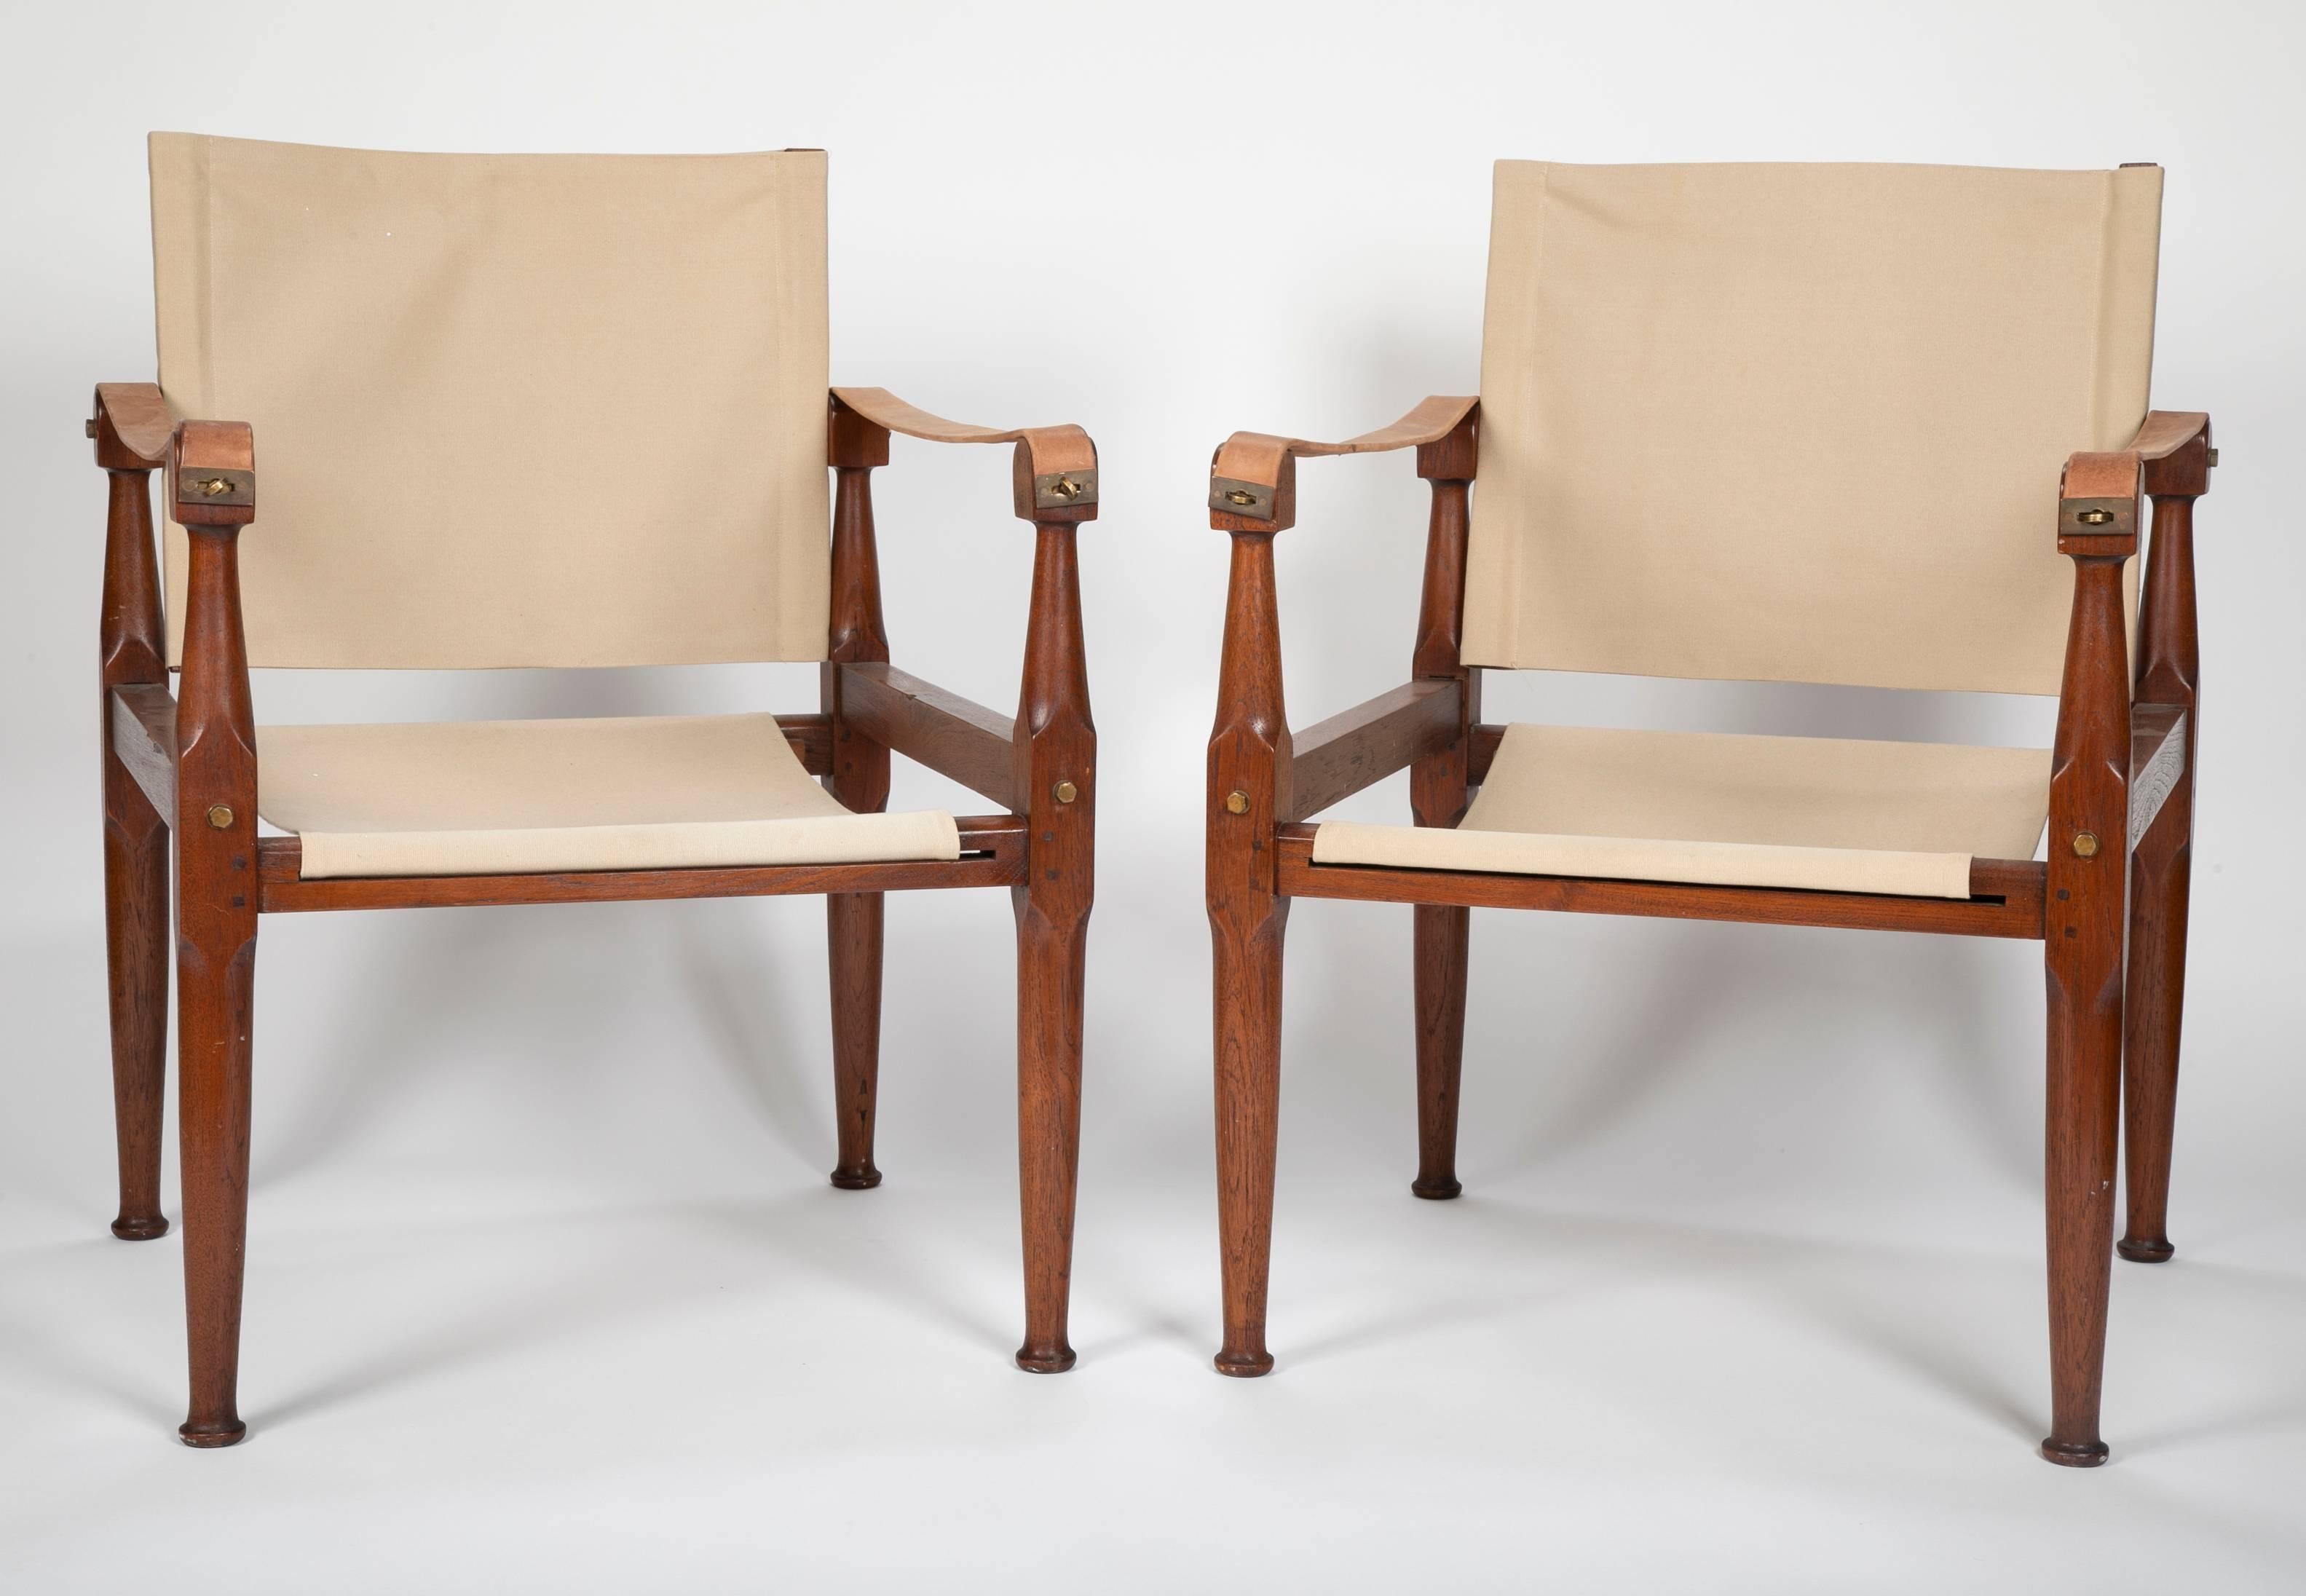 A pair of teak campaign chairs in the style of Karre Klint. Chairs have canvases seats and brass hardware. Ready to be placed.